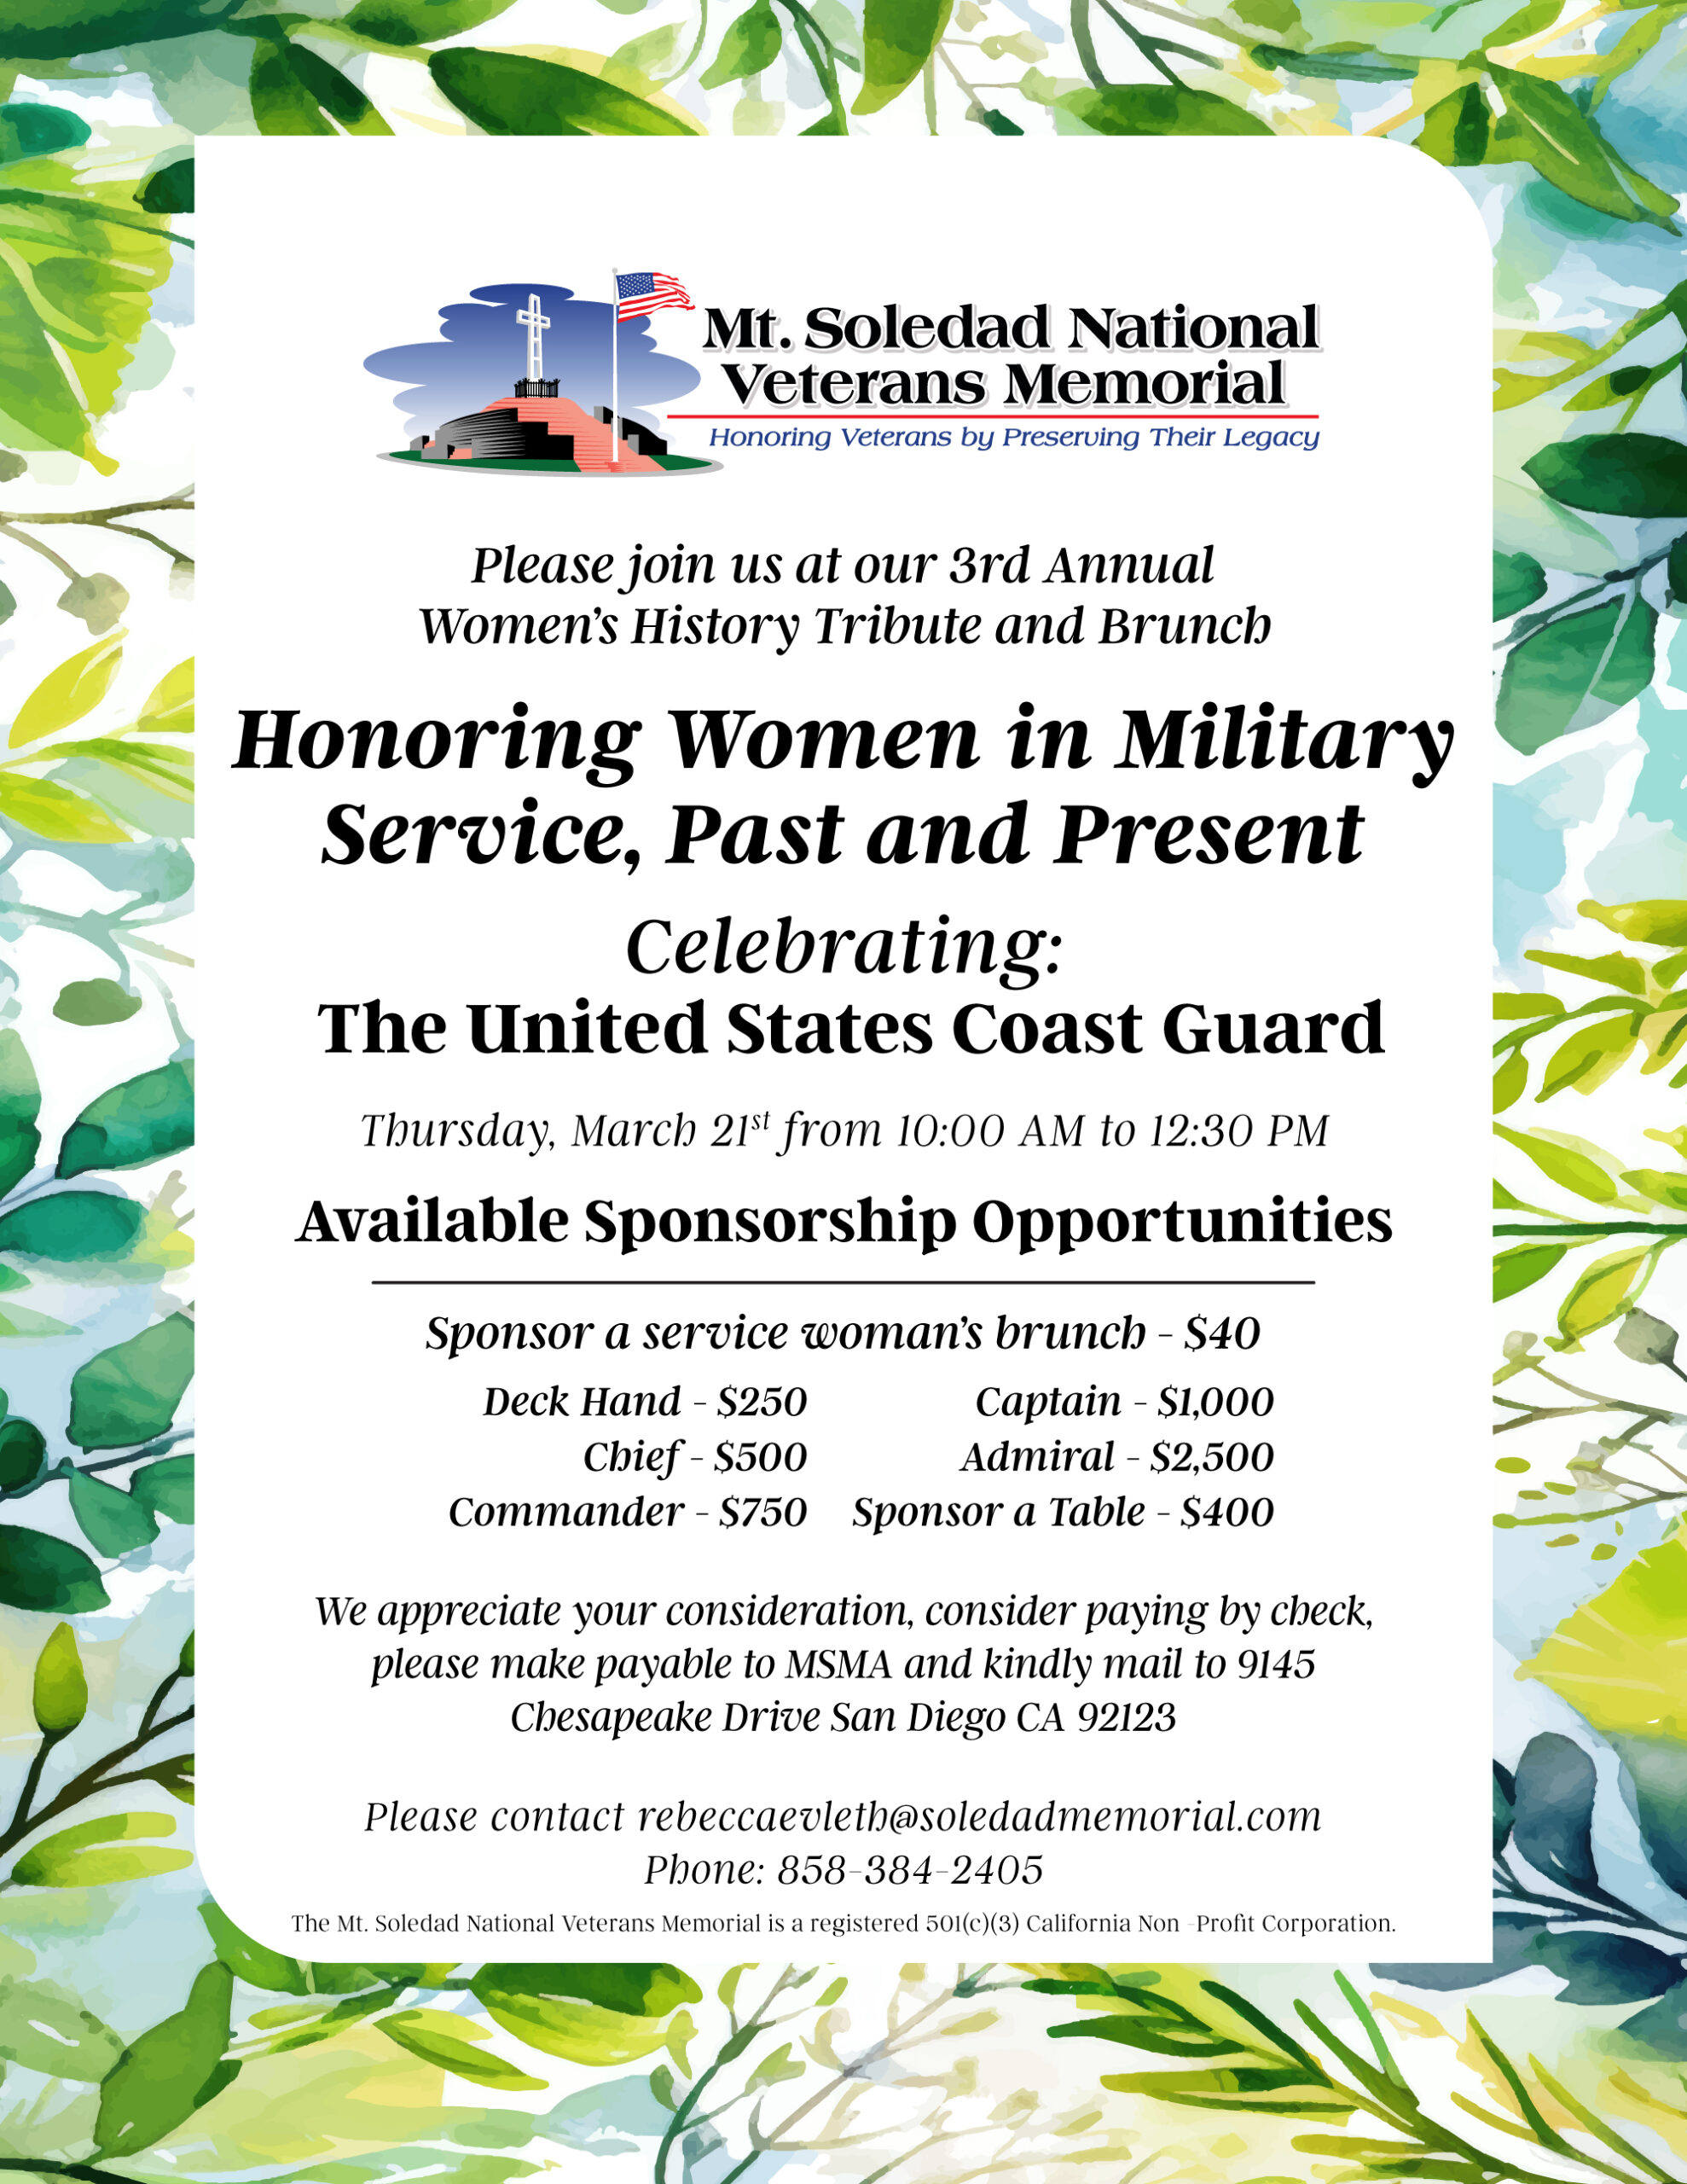 R3 Proudly Sponsors the Mt. Soledad National Veterans Memorial 3rd Annual Women’s History Brunch